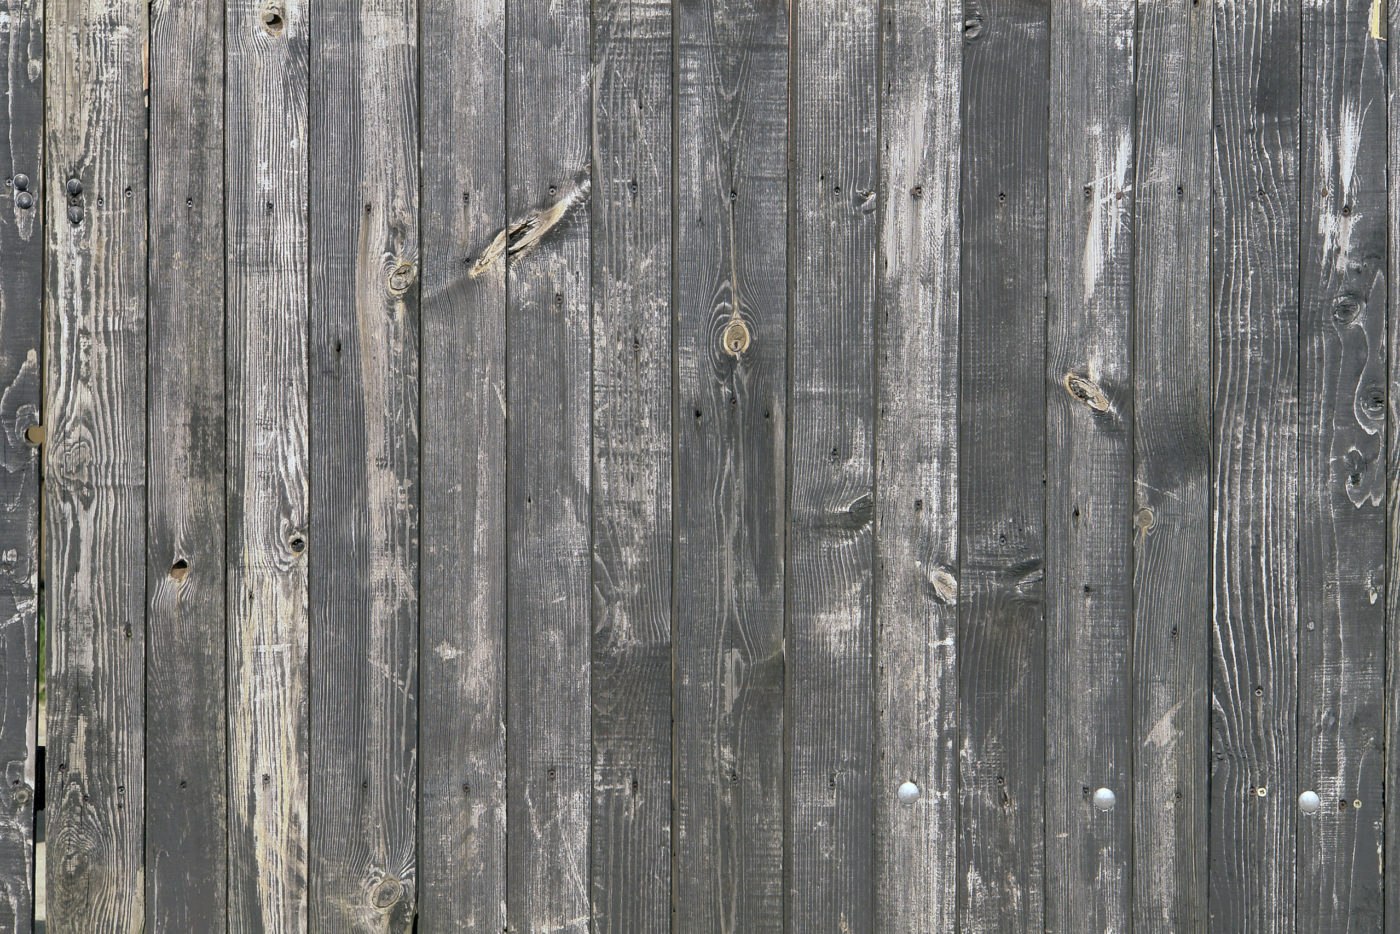 An image of an older weathered wooden fence.